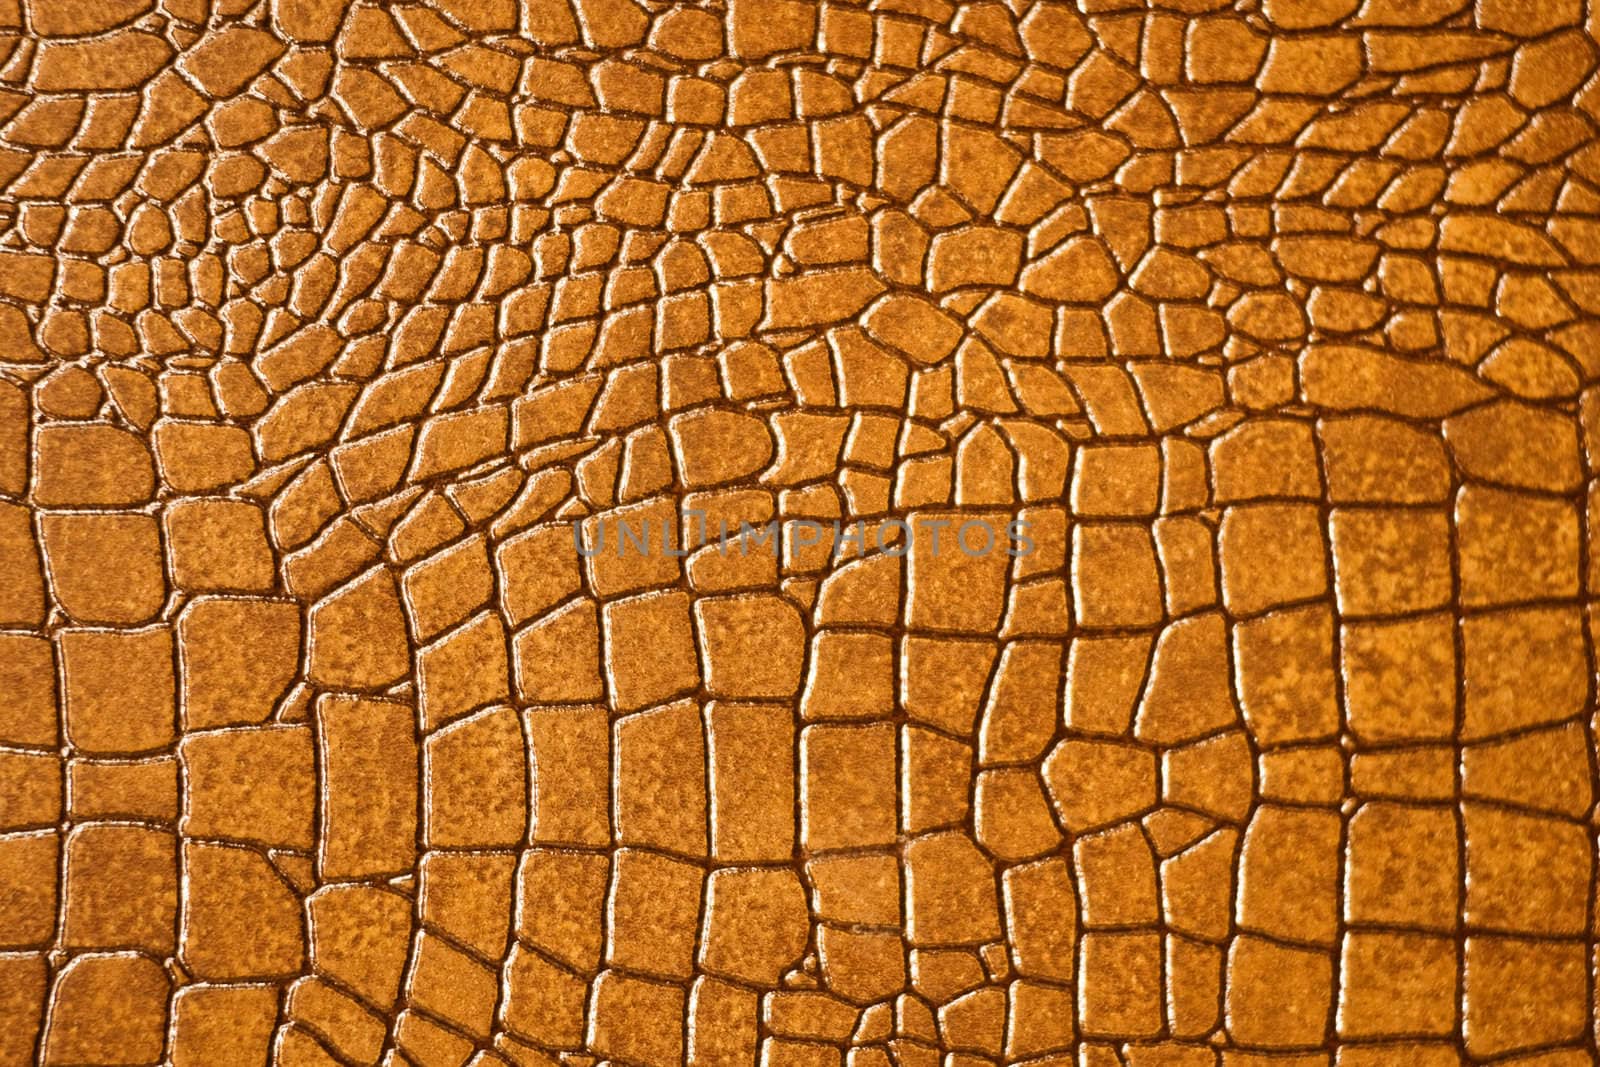 Brown snakeskin or crocodile texture for background